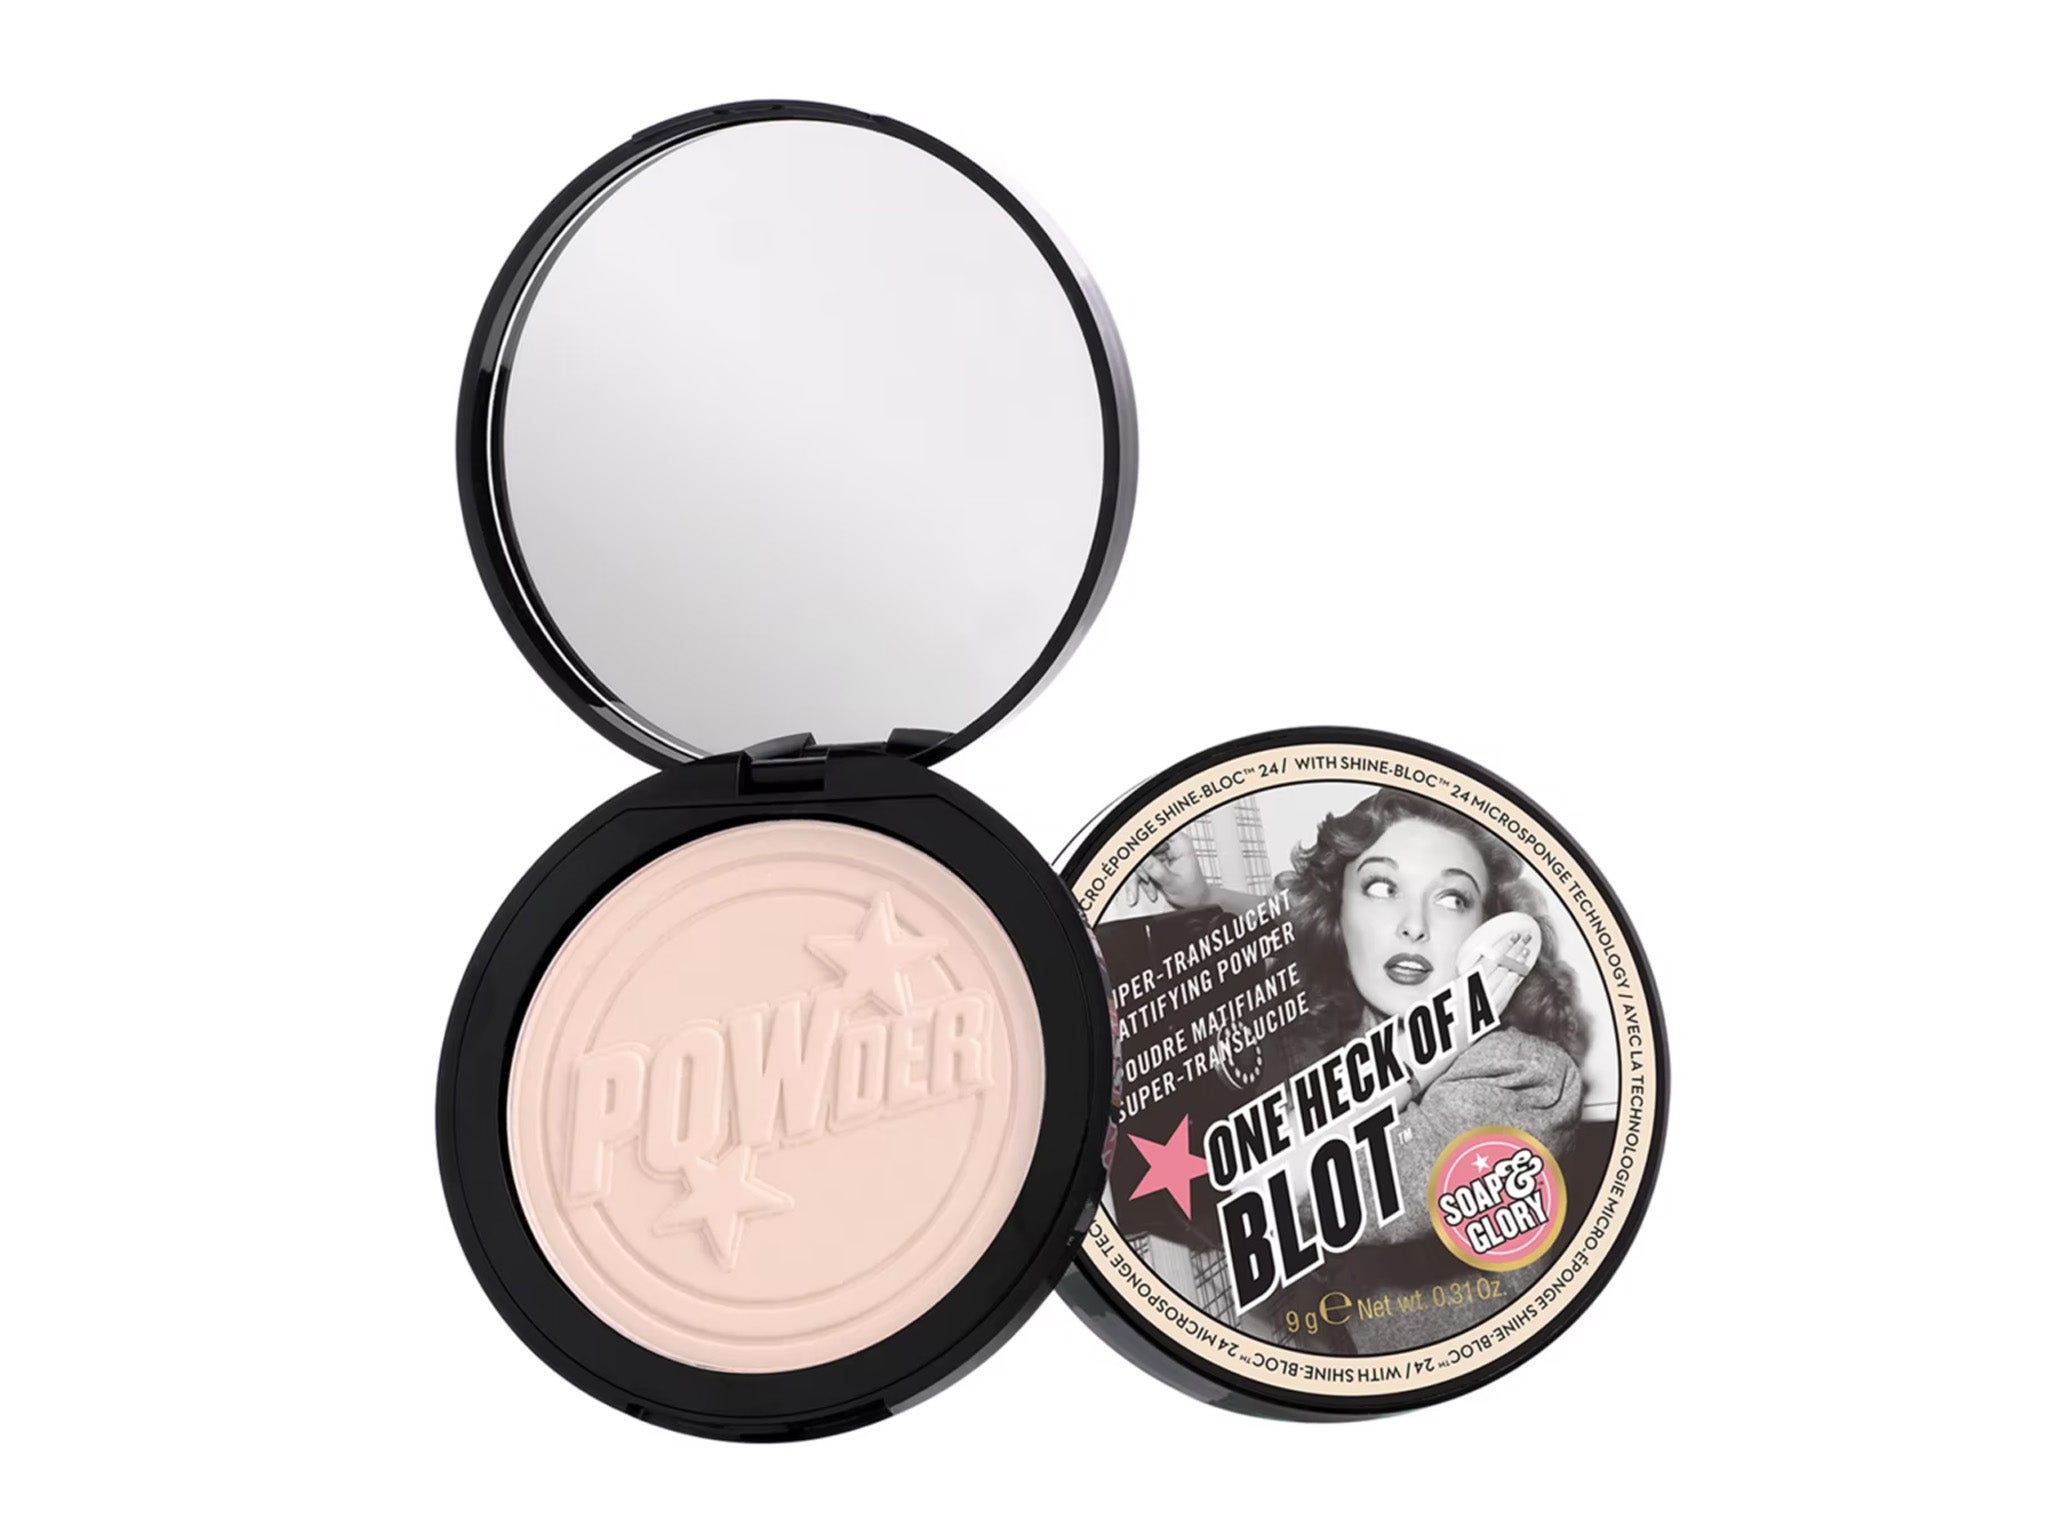 Soap & Glory one heck of a blot powder